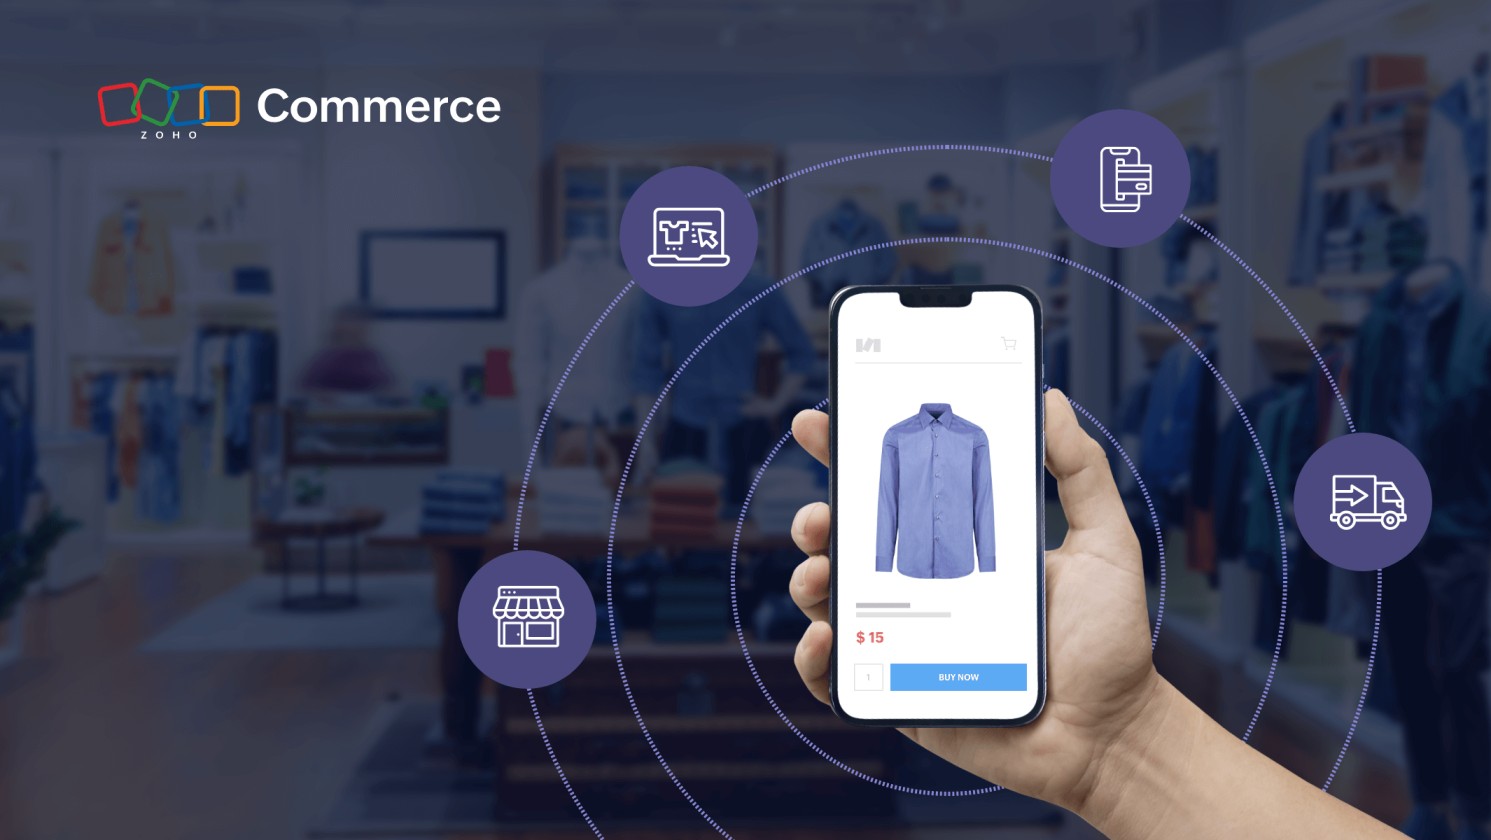 Ecommerce is a rapidly growing and exciting way of doing business online